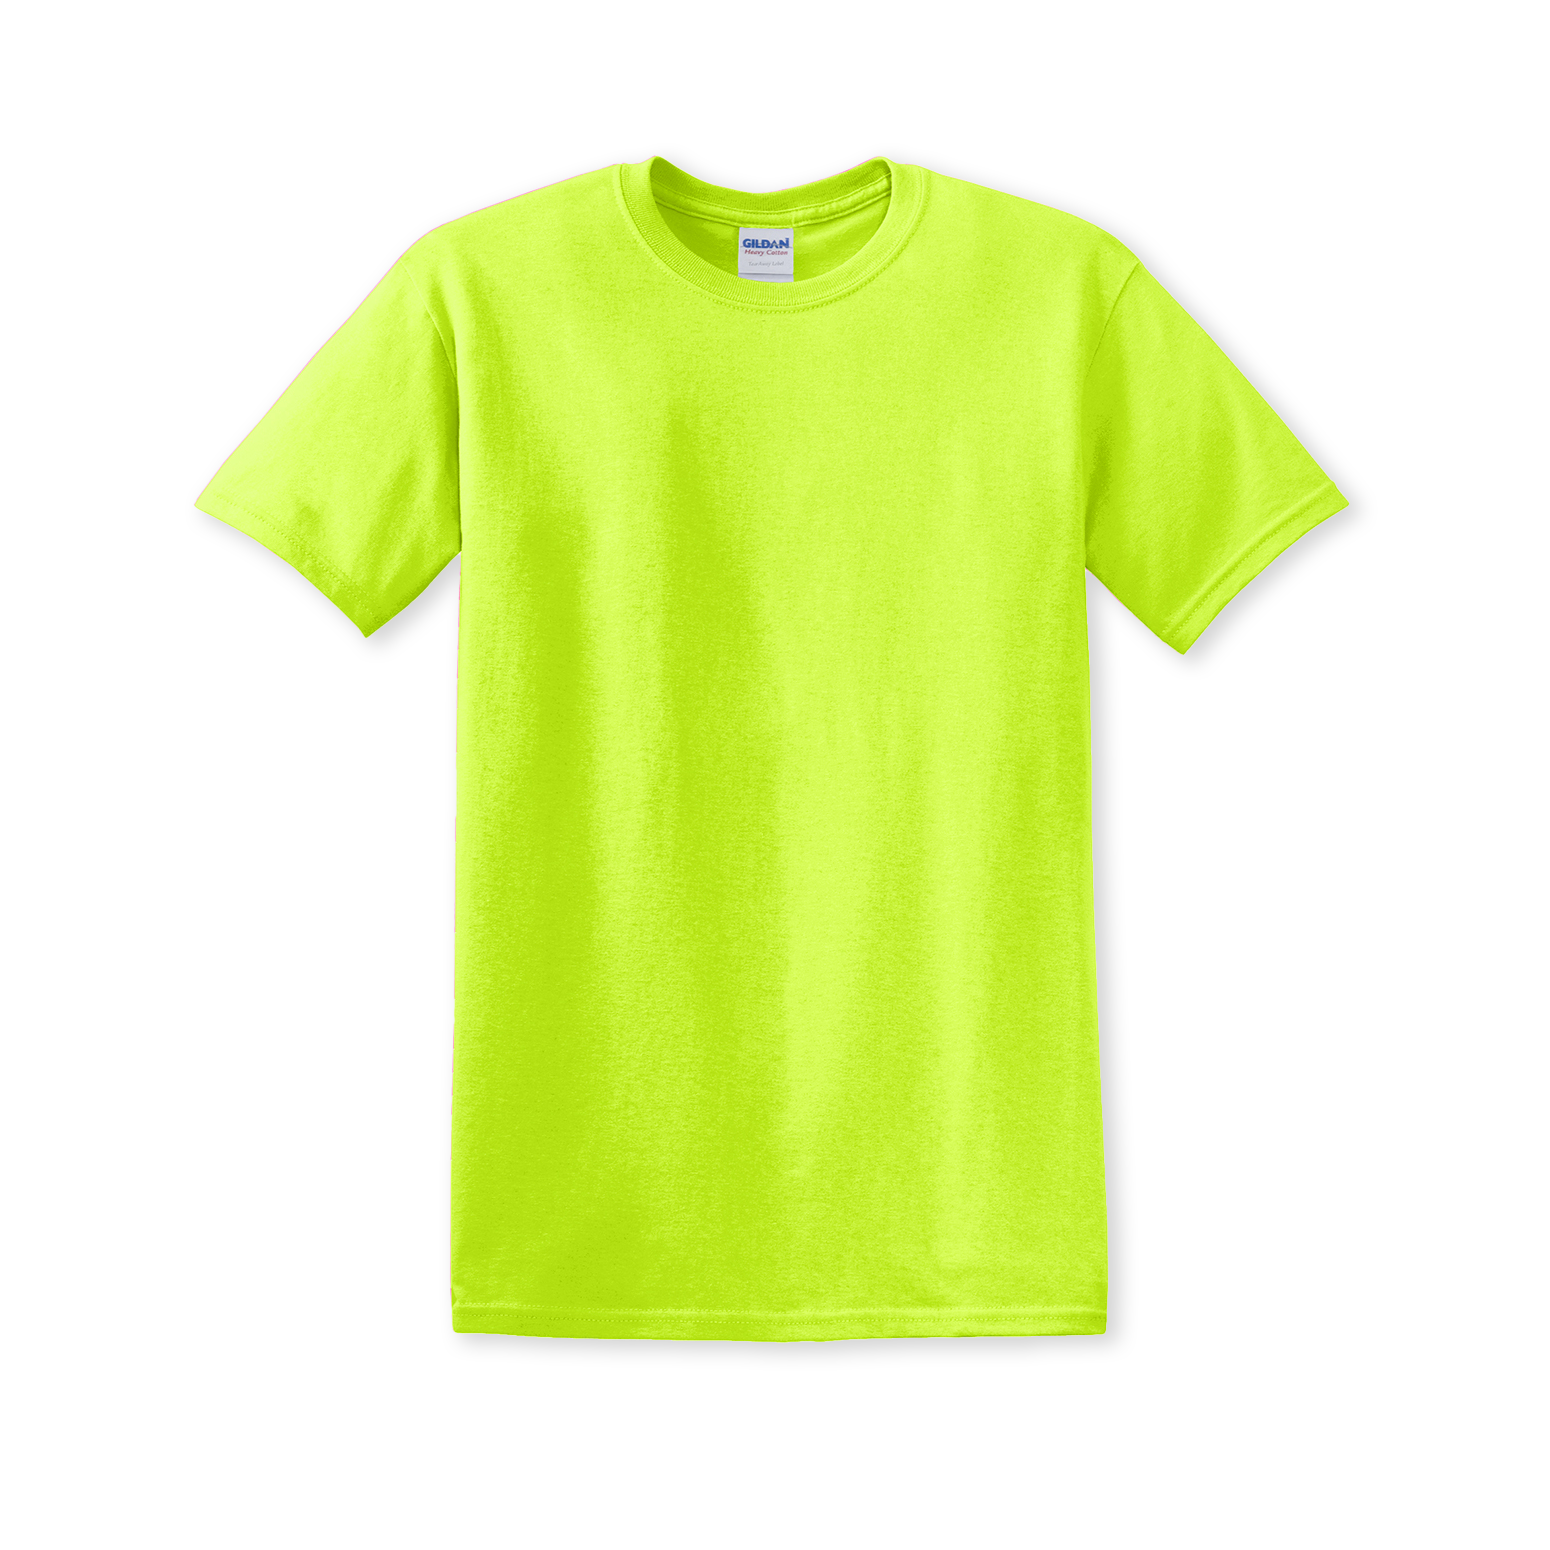 Light Bright Sheets T-Shirts for Sale